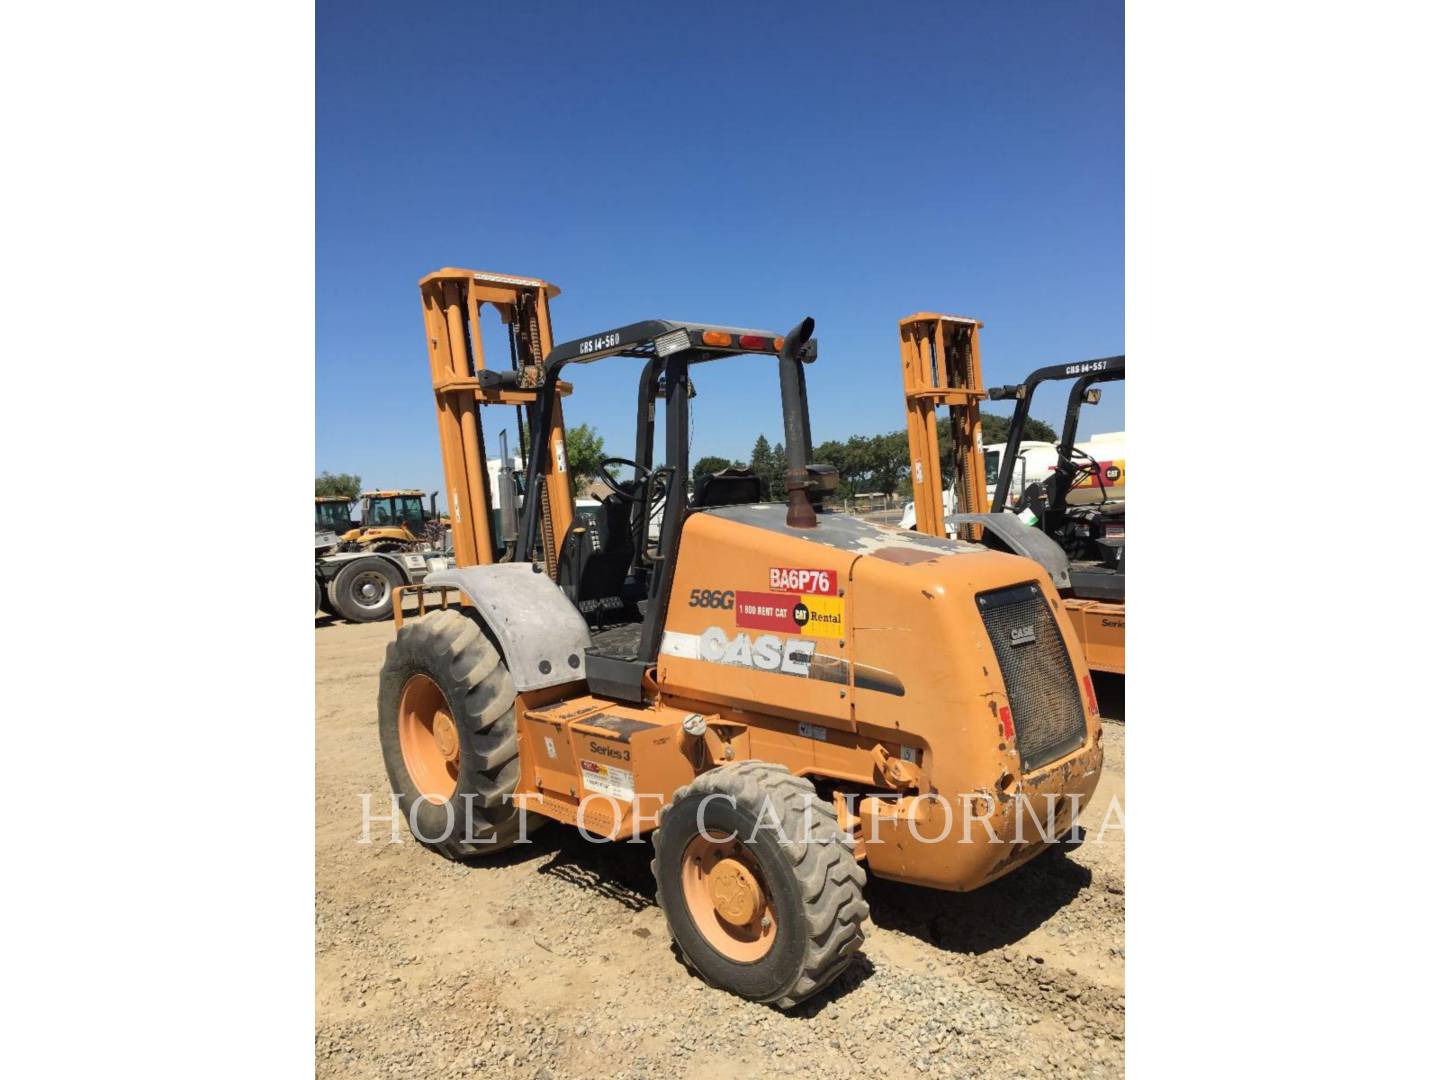 2012 Case 586g Case Forklift For Sale In Stockton Ca Ironsearch